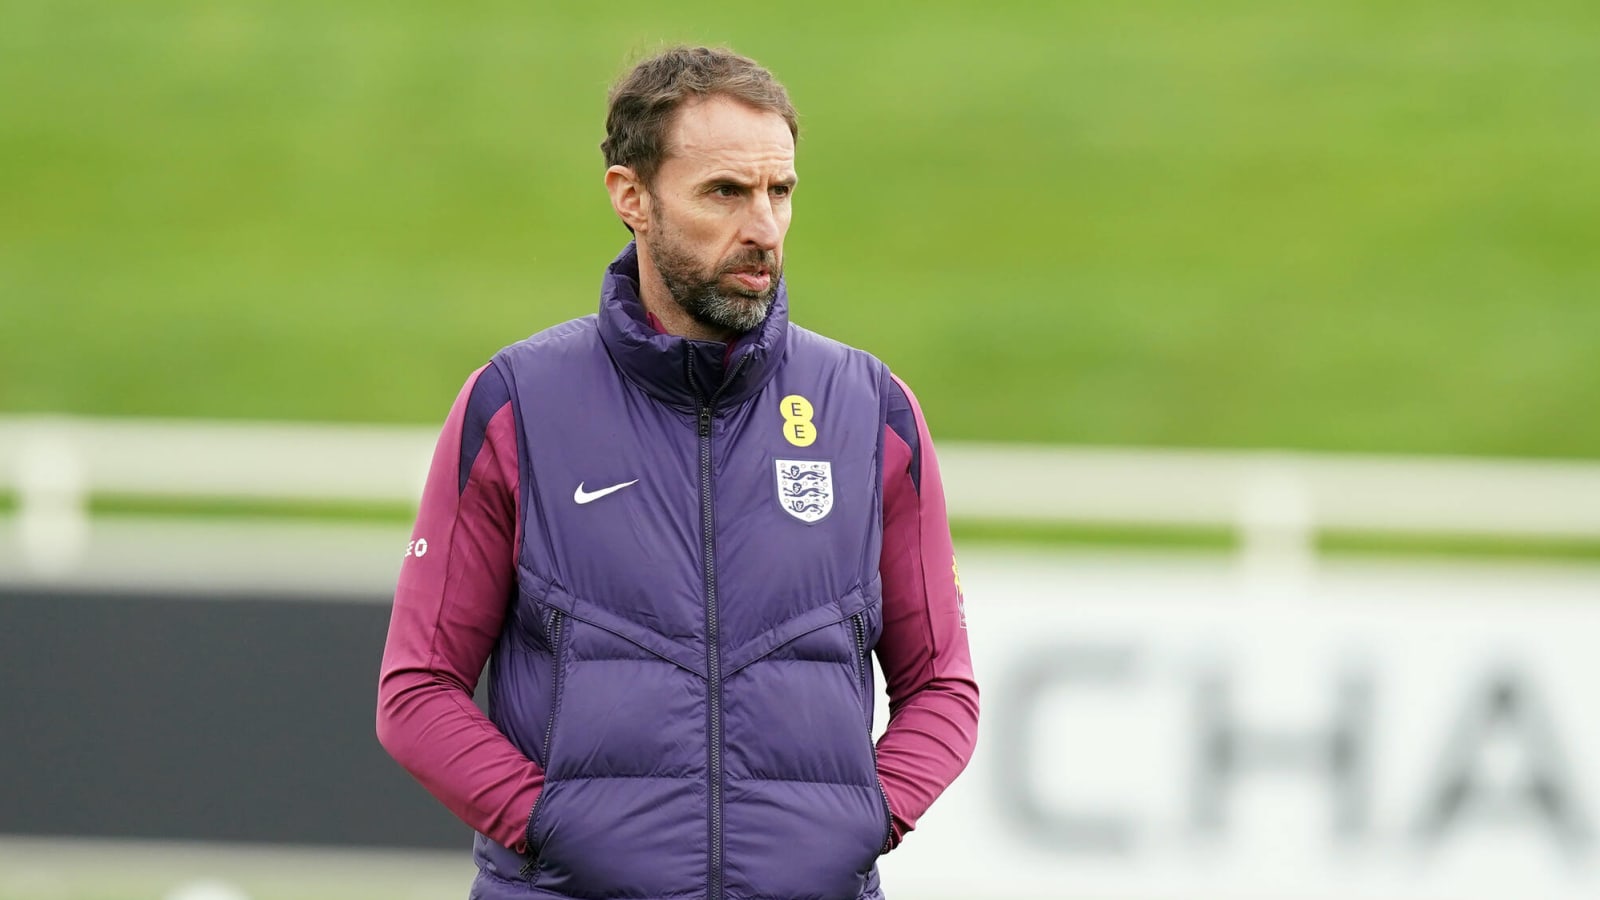 Roy Keane and Gary Neville could envisage Gareth Southgate as Manchester United manager